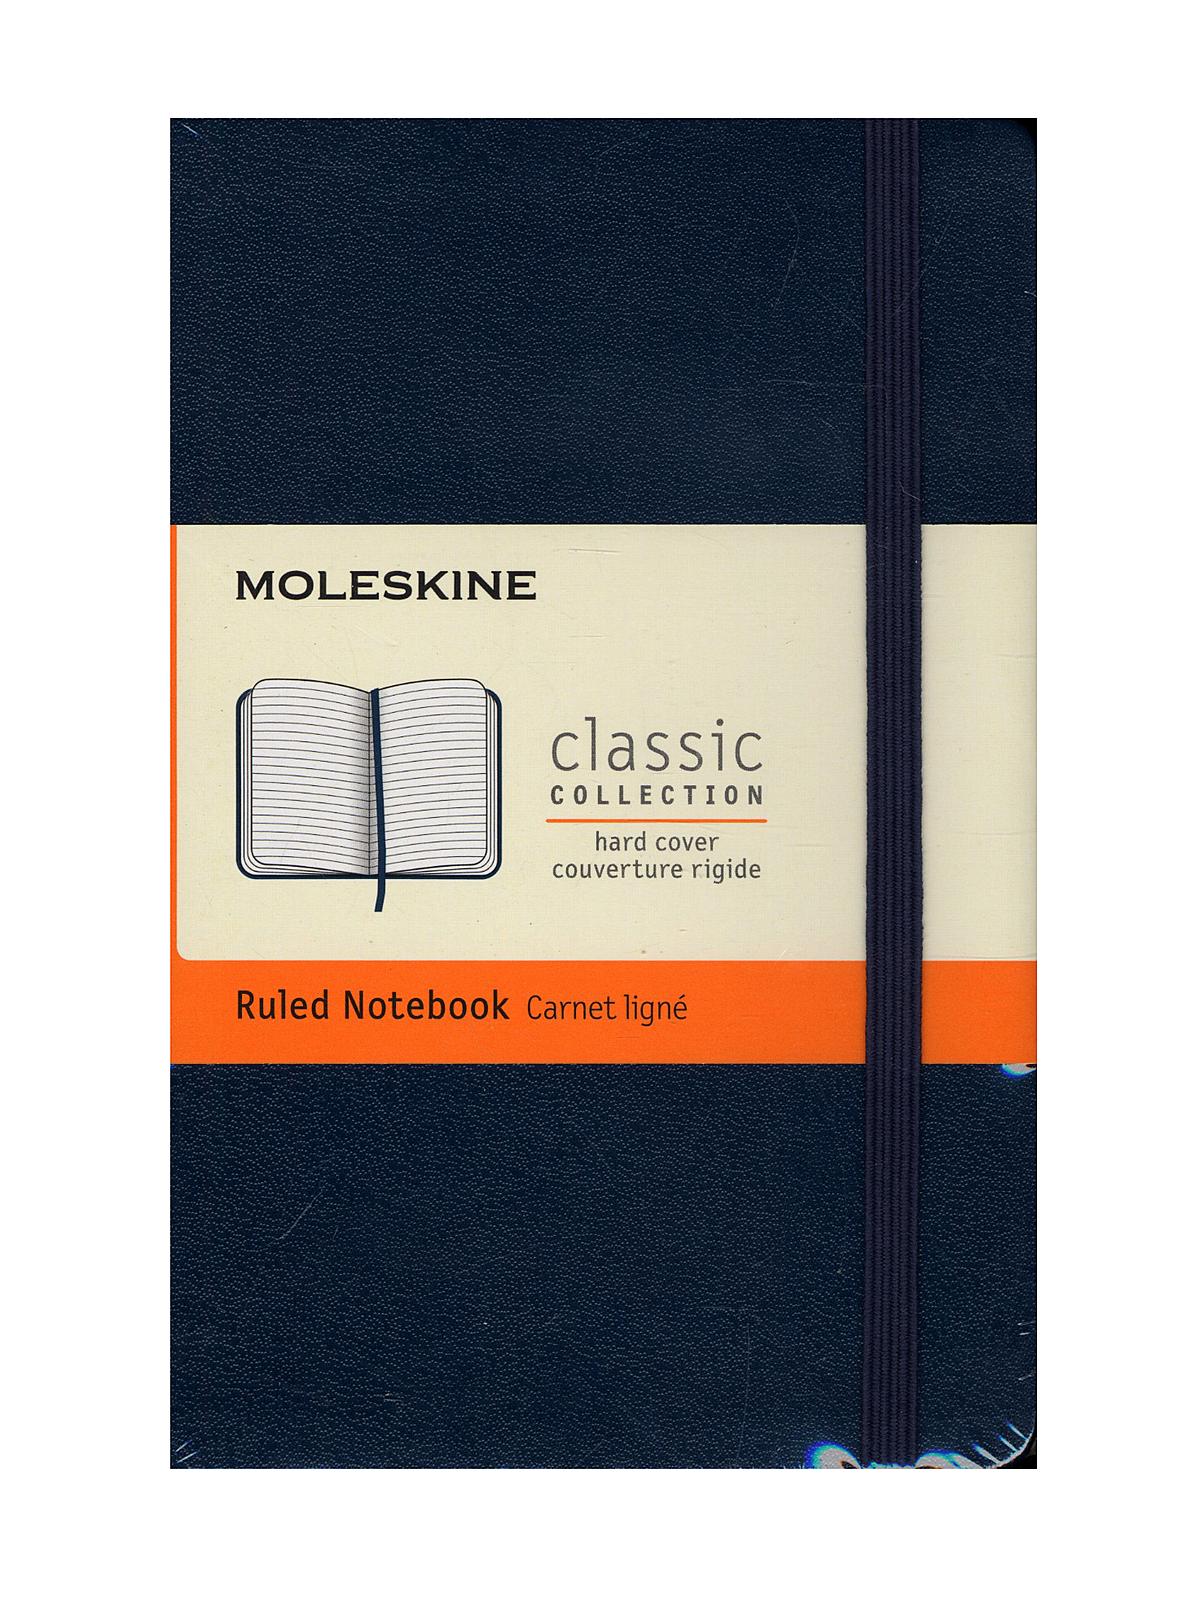 Classic Hard Cover Notebooks Sapphire Blue 3 1 2 In. X 5 1 2 In. 192 Pages, Lined